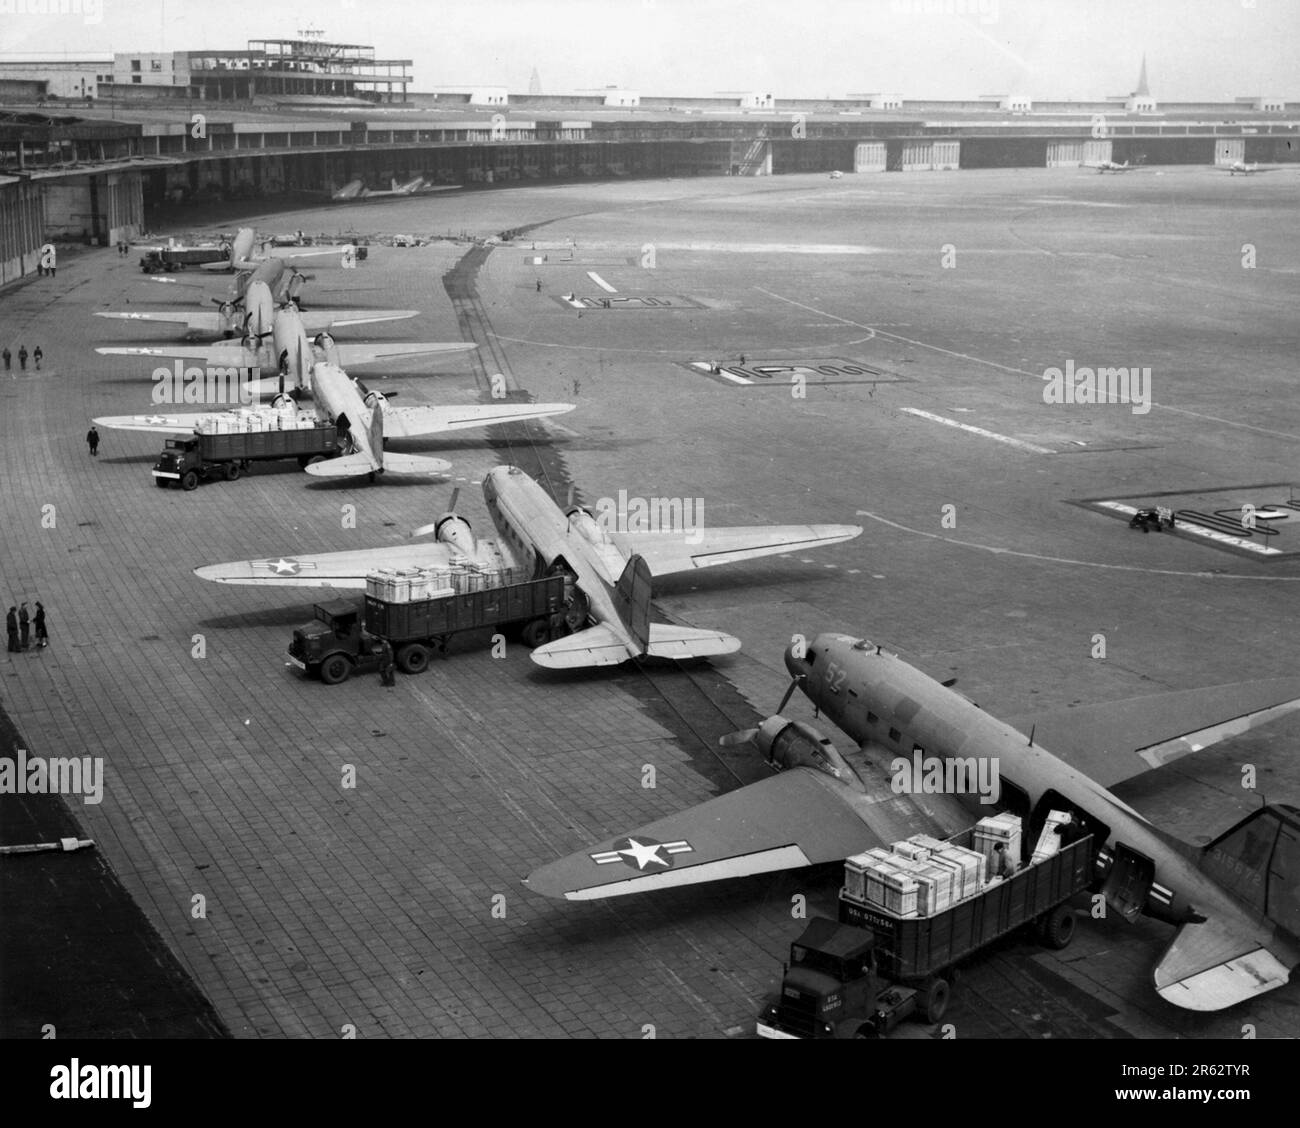 C-47 Skytrains unloading at Tempelhof Airport during the Berlin Airlift. In response escalating tensions and to the establishment of.a new West German currency, the Soviets cut off all land communications to West Berlin and stopped sending food there. TheAllied response was an eleven month campaign to supply W Berlin with the 5000 tons per day of food and fuel it needed. A plane landed every three minutes day and night and the operation was so succesful that the Soviets had to back down and reopen the roads, railways and canals. Stock Photo